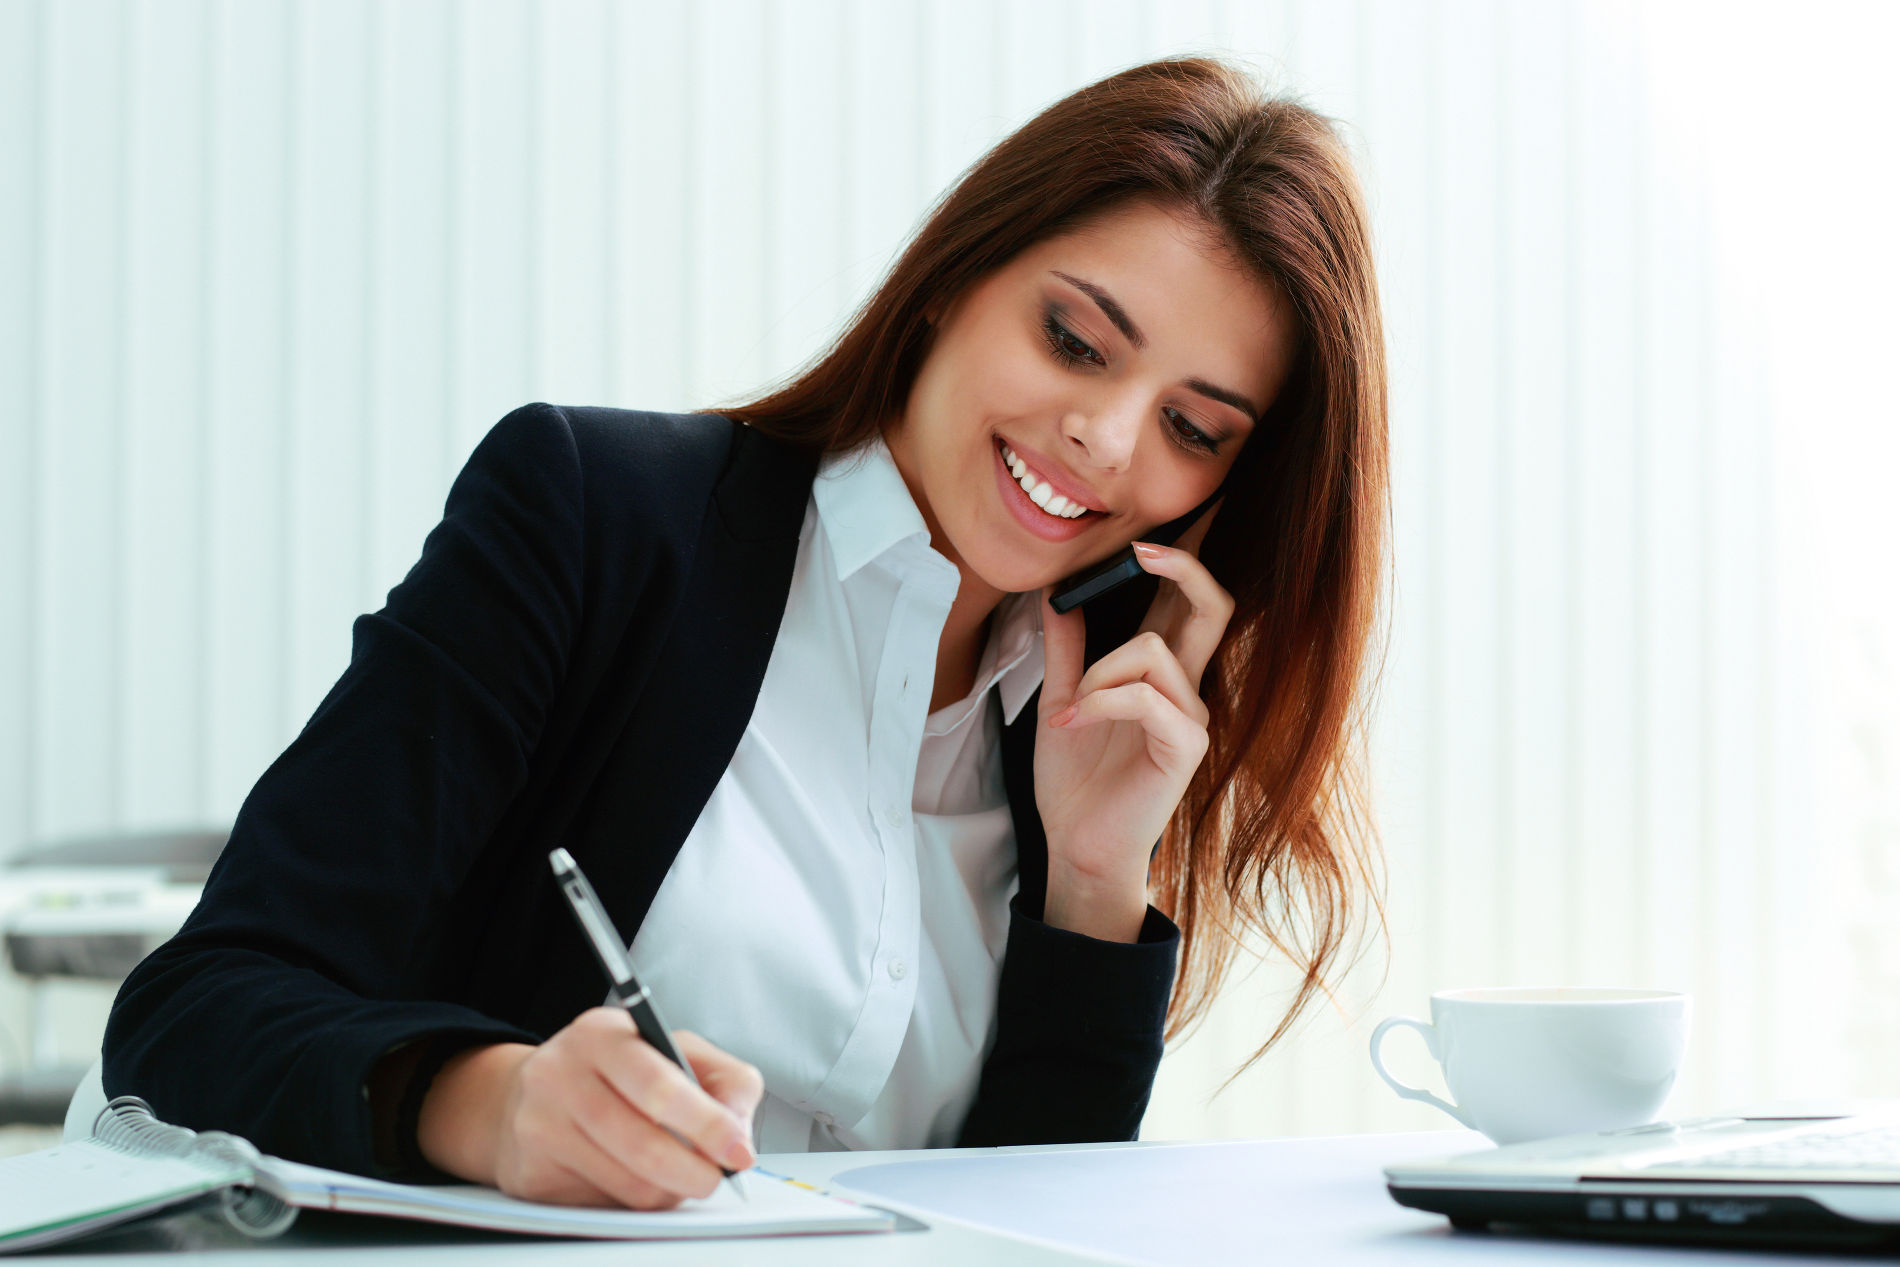 6 Practical Tips for a Smooth Phone Interview